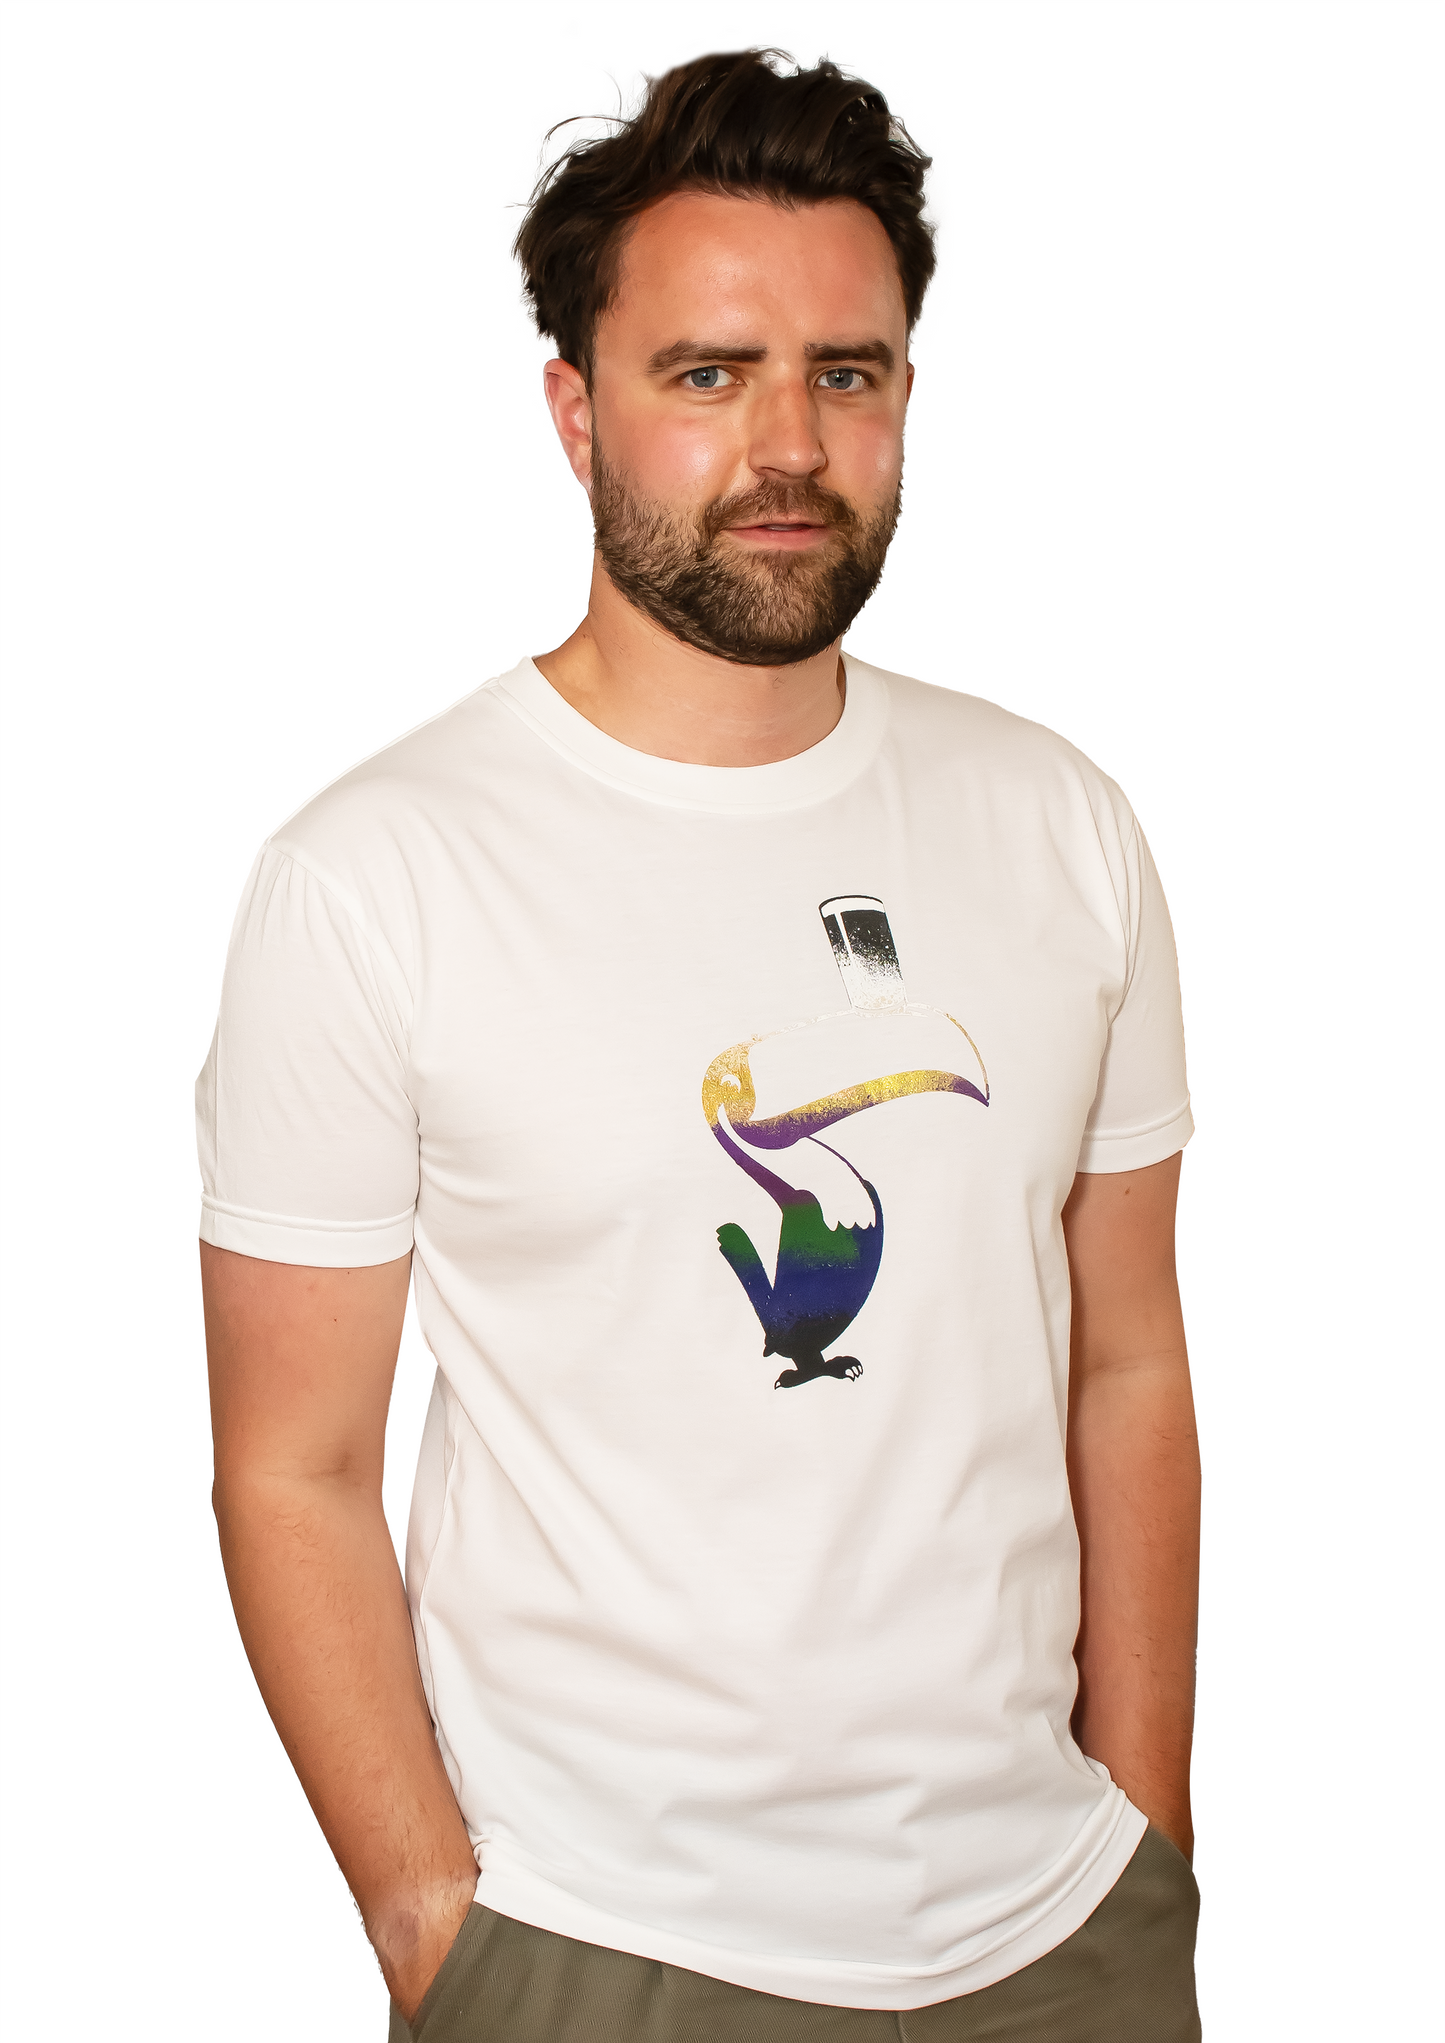 A man wearing a Guinness Liquid Toucan T-Shirt - White with a bird on it.